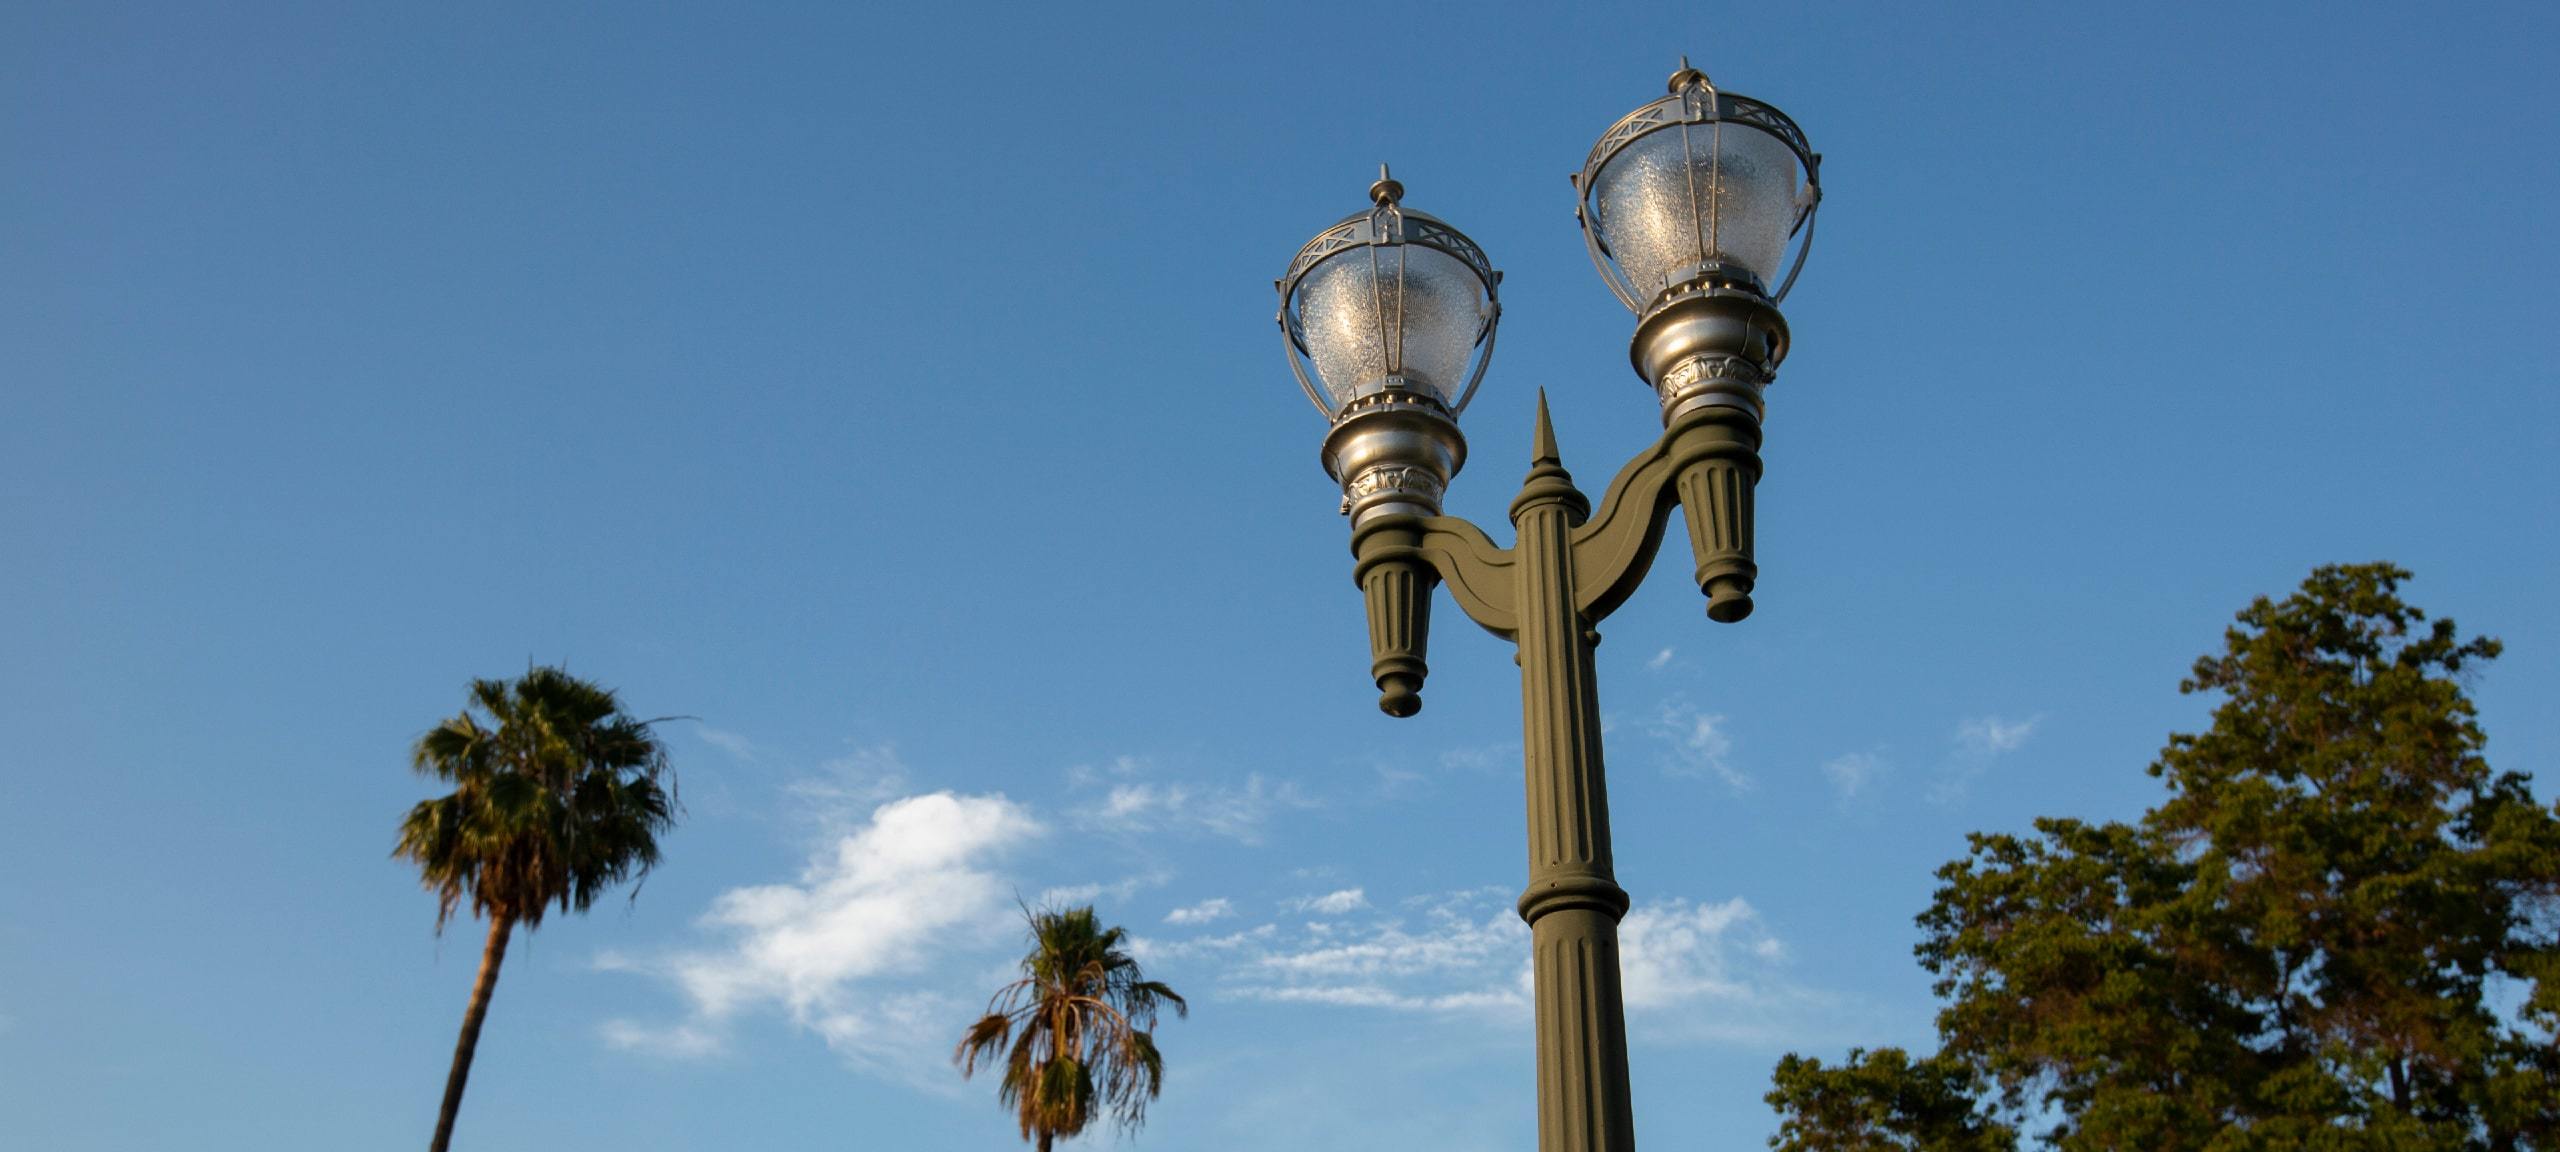 Historic lamp post and palm trees in Anaheim, California